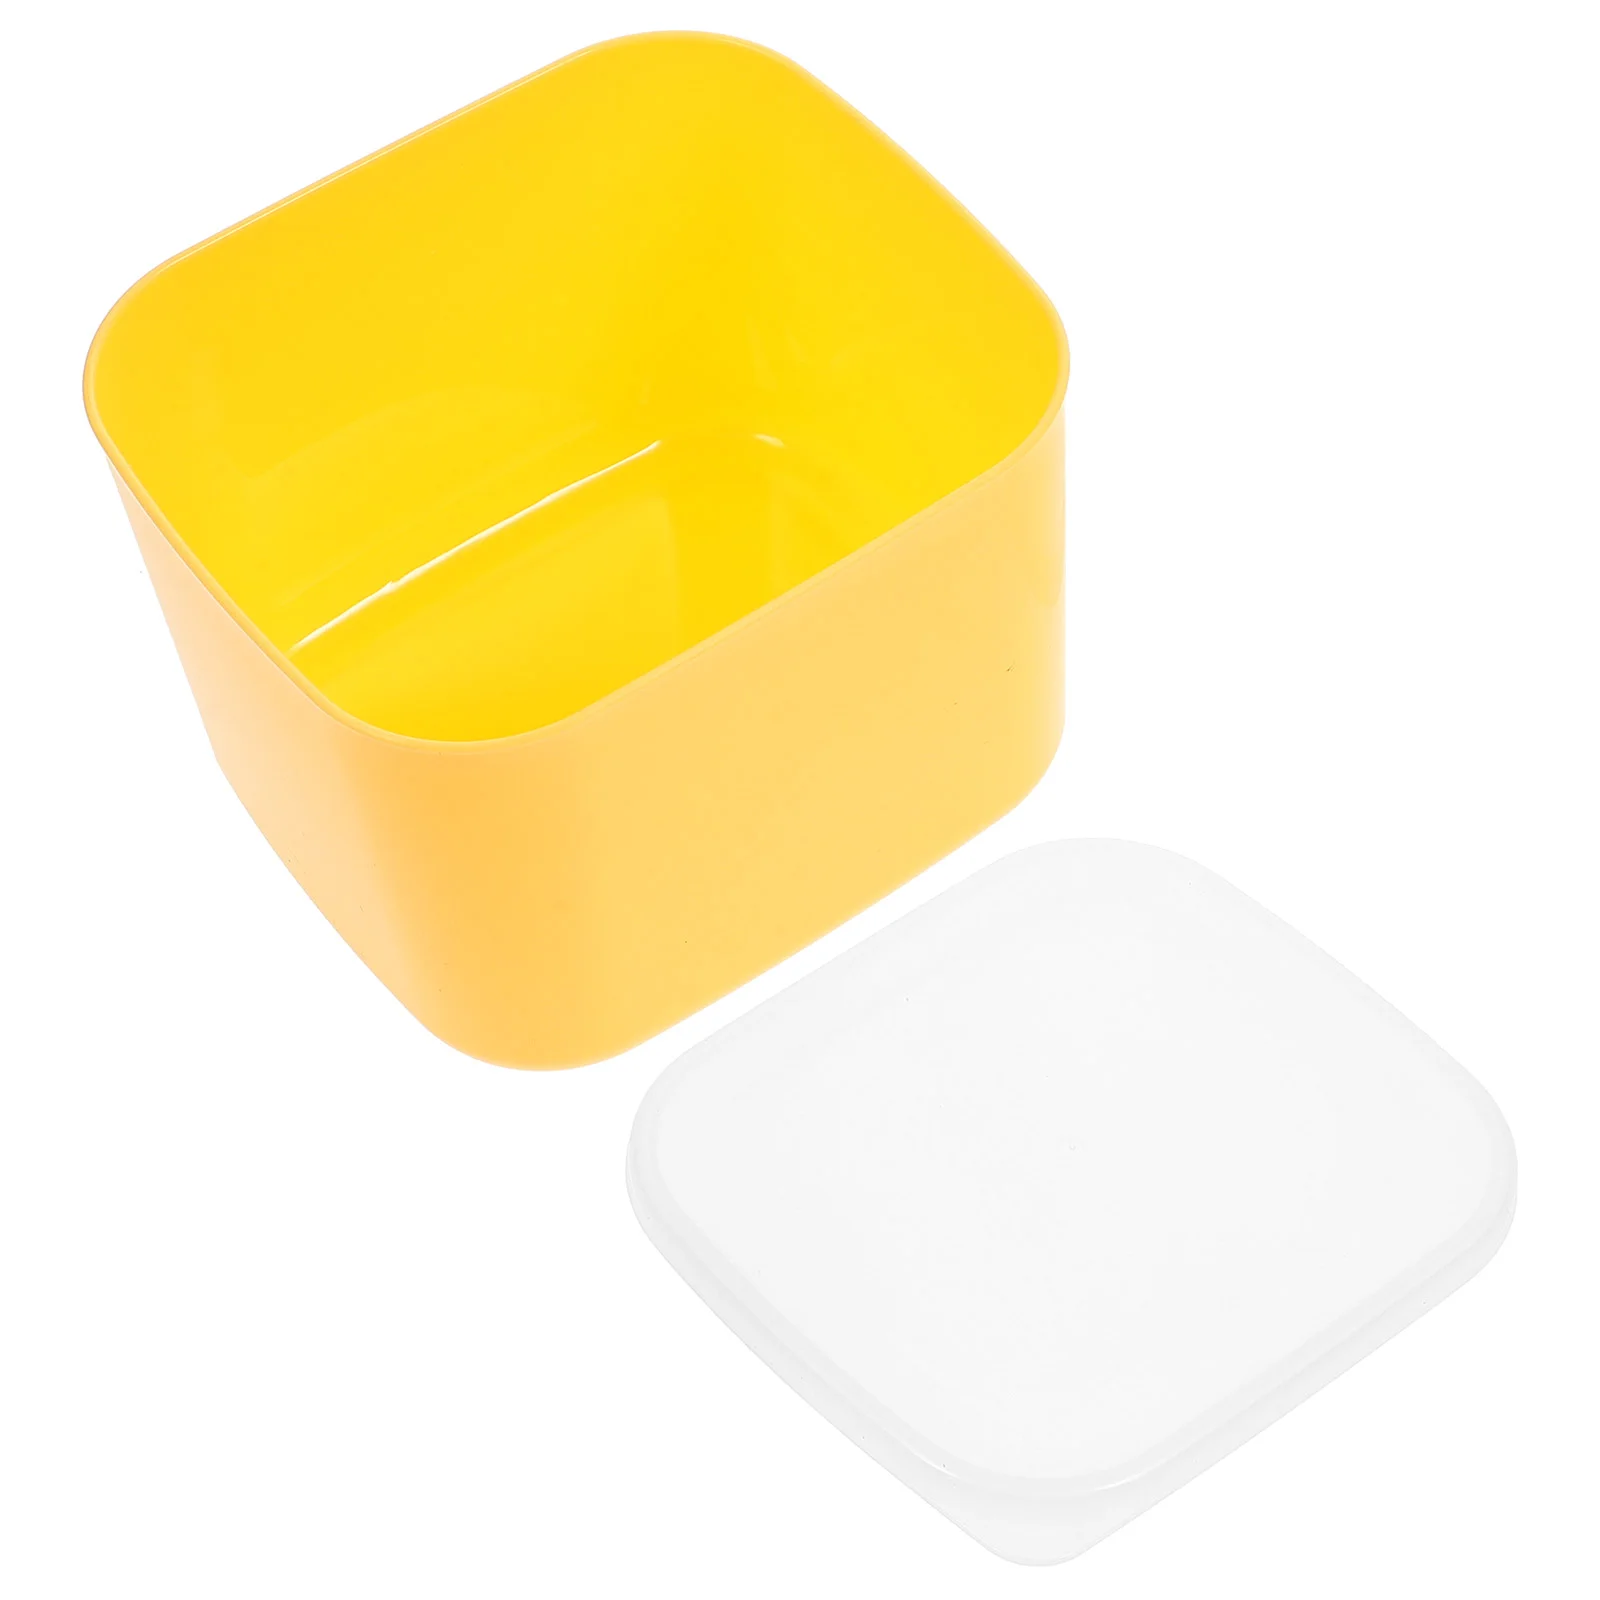 

Mini+fridge Storage Box Cheese Container Covered Cases Kitchen Containers Delicatessen Sliced Lunch Meat Refrigerator Butter